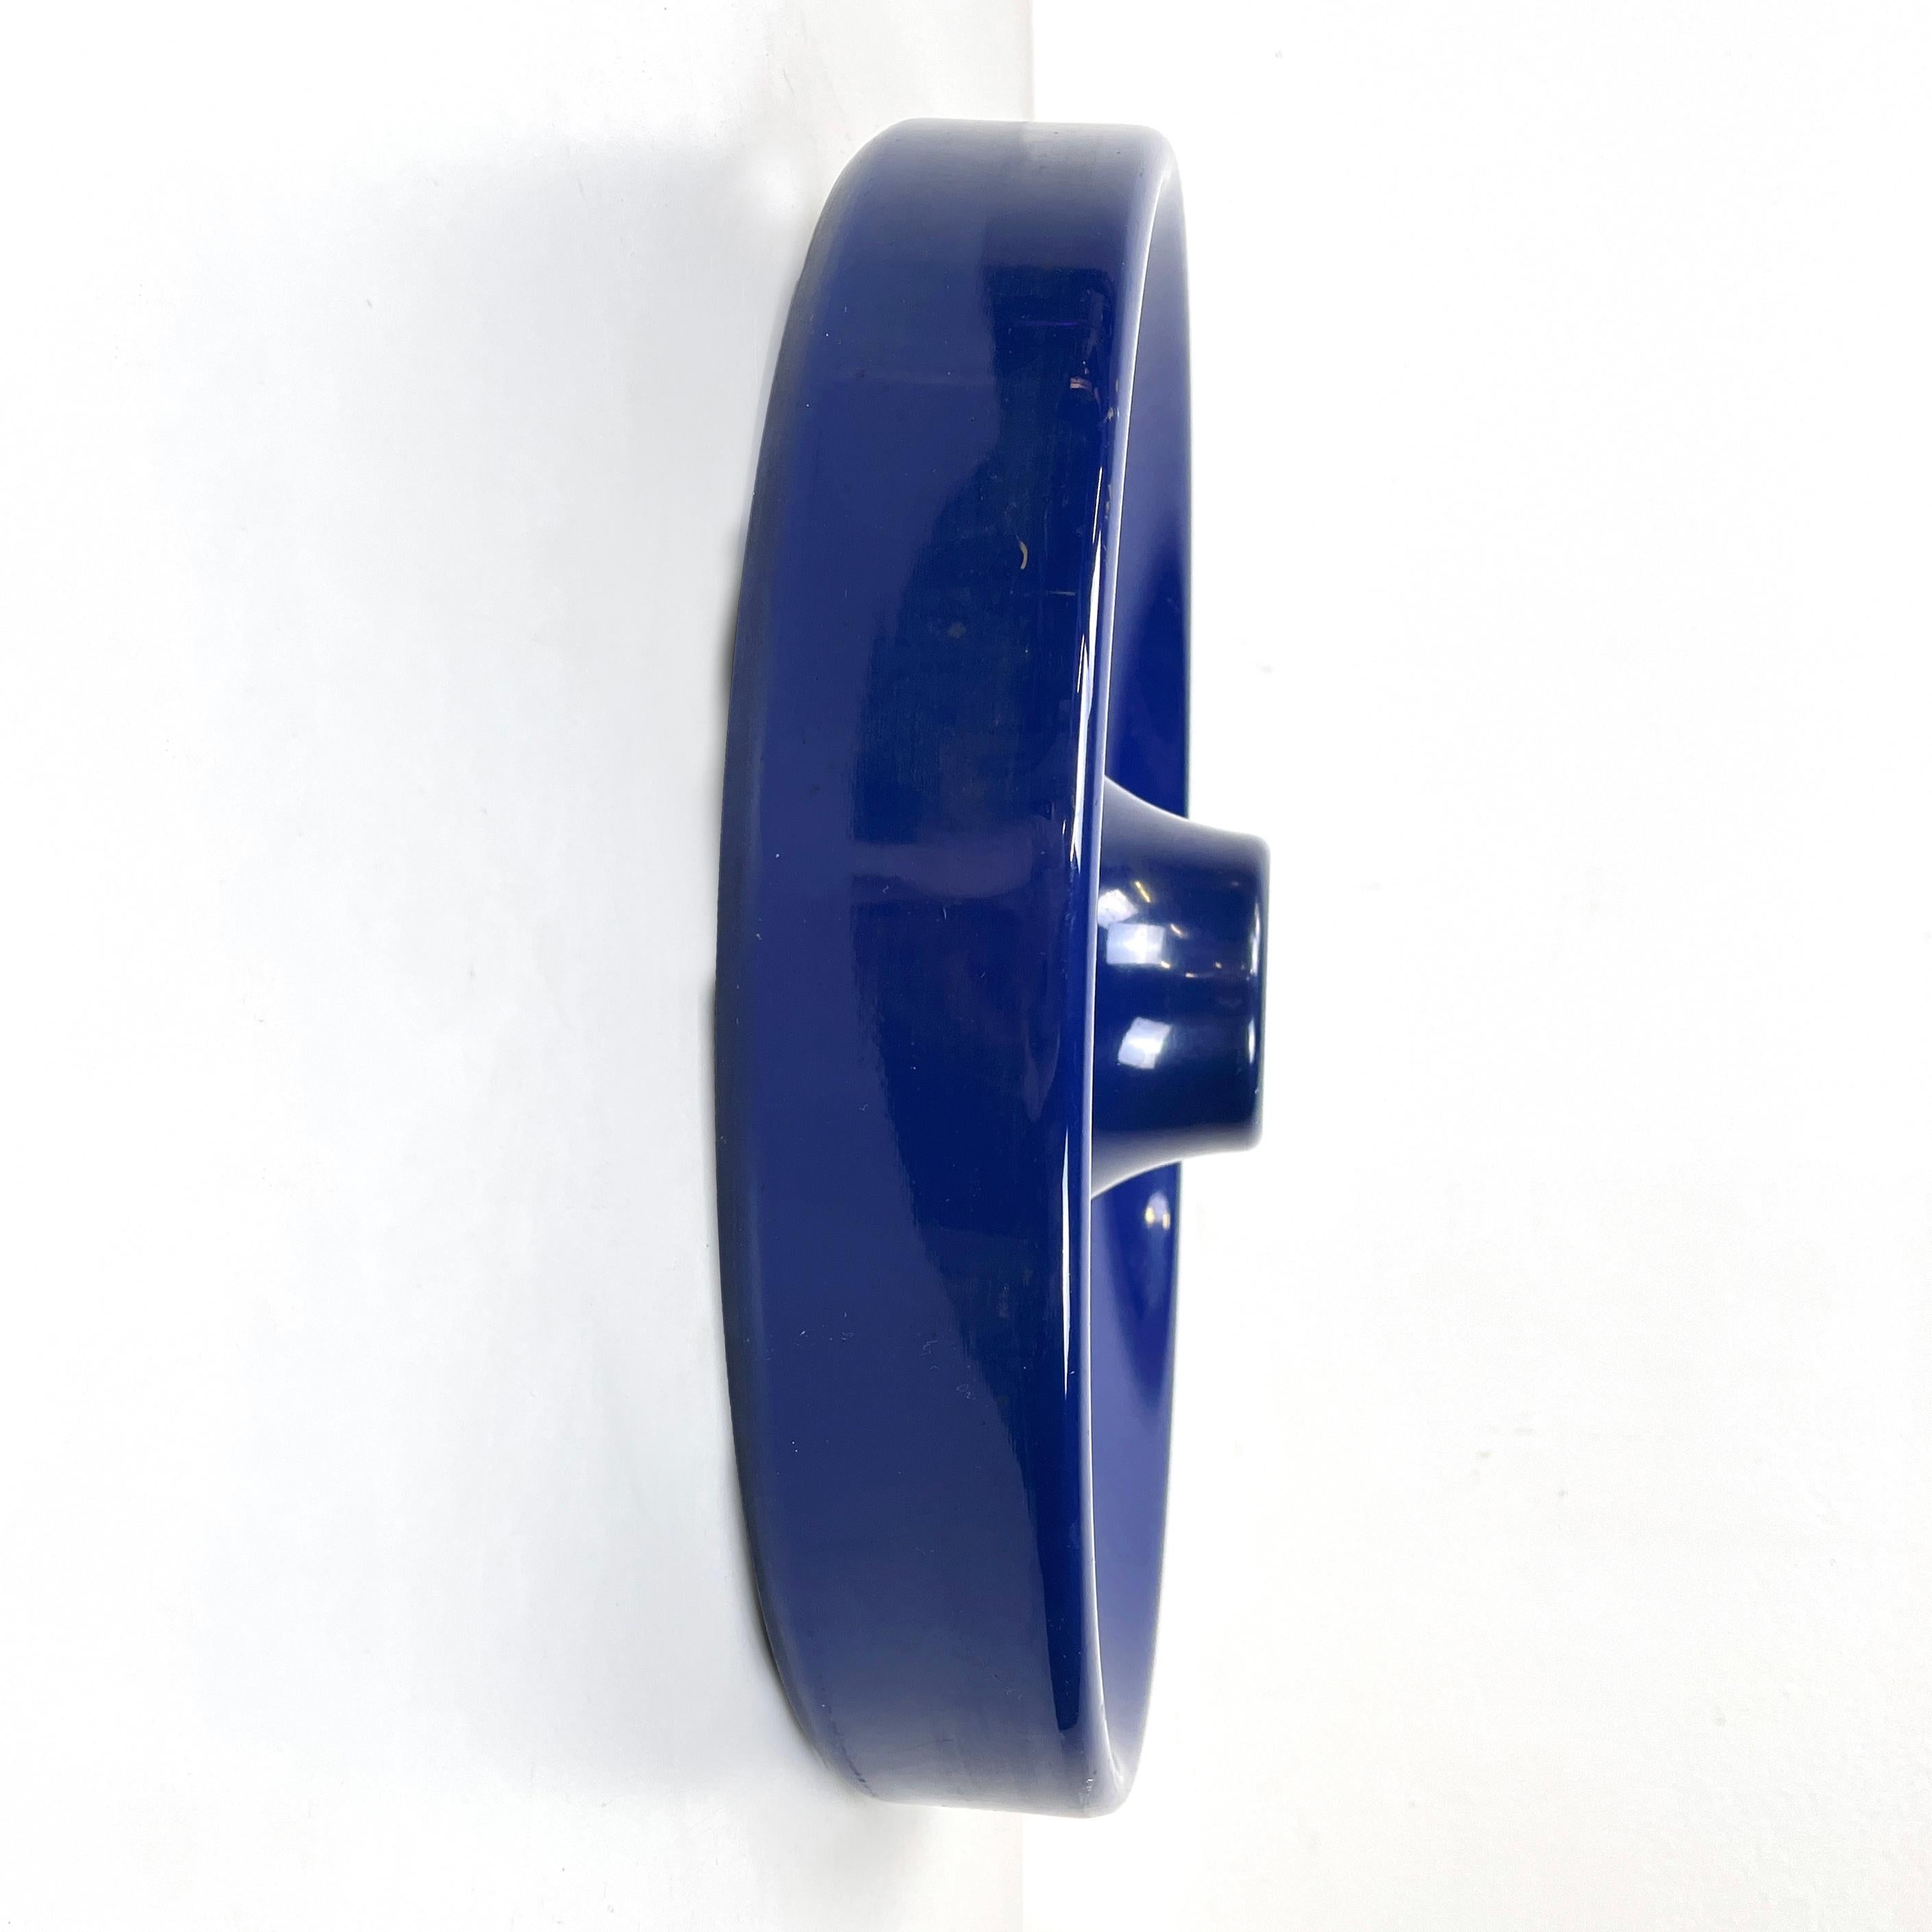 Italian space age modern Wall or ceiling lamp in blue emelled metal, 1980s
Wall or ceiling light with a round base in dark blue emelled metal. The front of the lamp has a convex curvature and a thick rounded profile.
1980 approx.
Good condition,